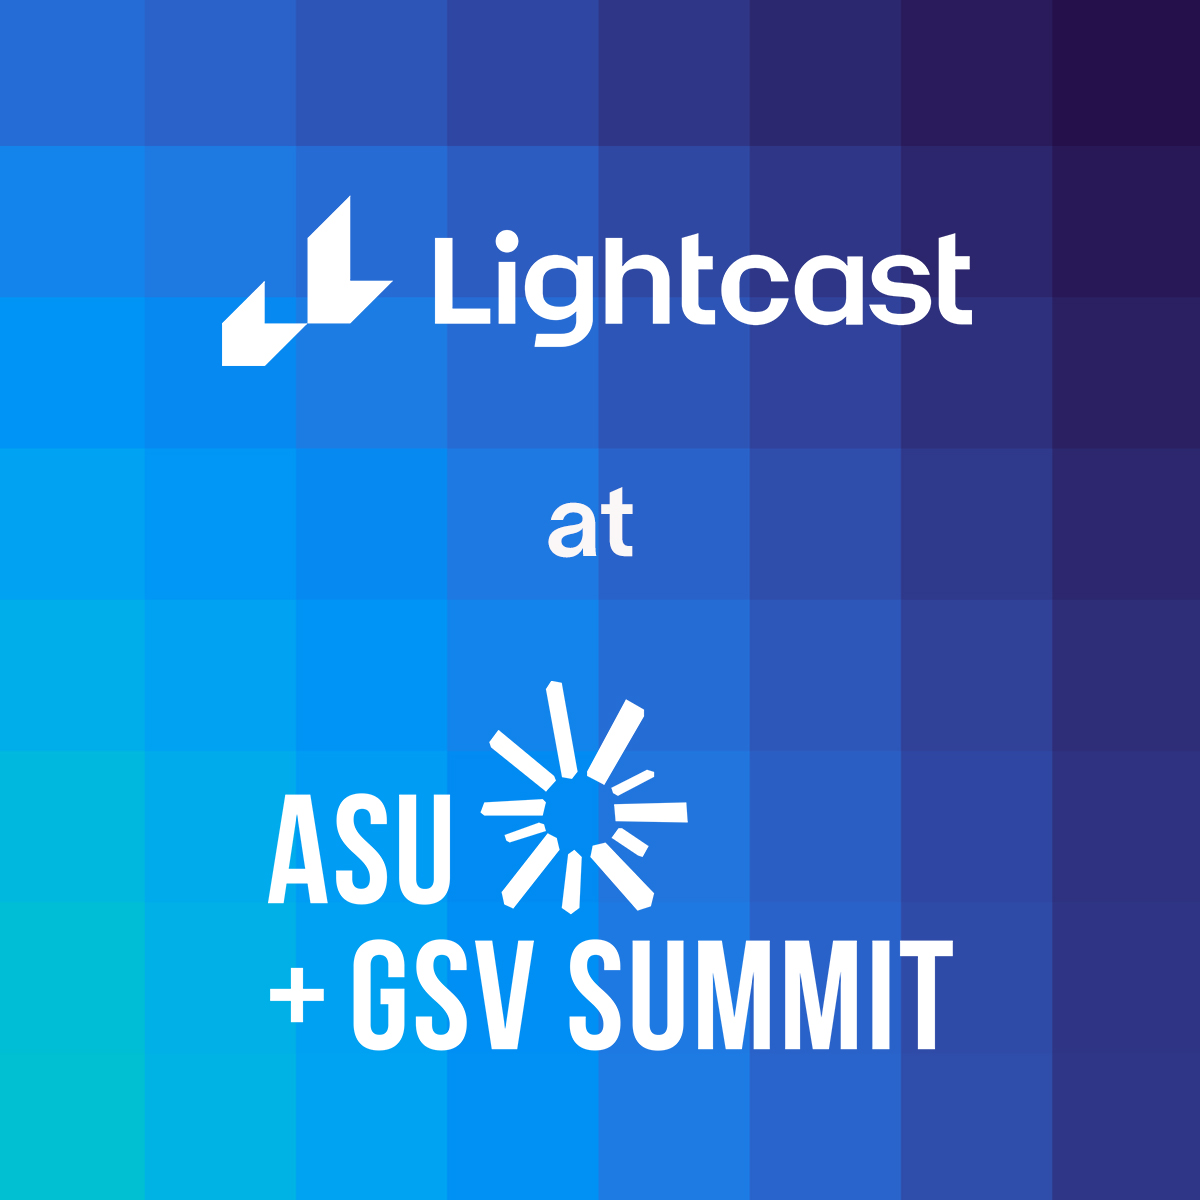 At #ASUGSVSummit?? Stop by our booth in the Seaport Foyer, on the 2nd floor. We'd love to talk with you about what we're seeing in #highered via our data, current trends, and all things #EdTech. #WeAreLightcast